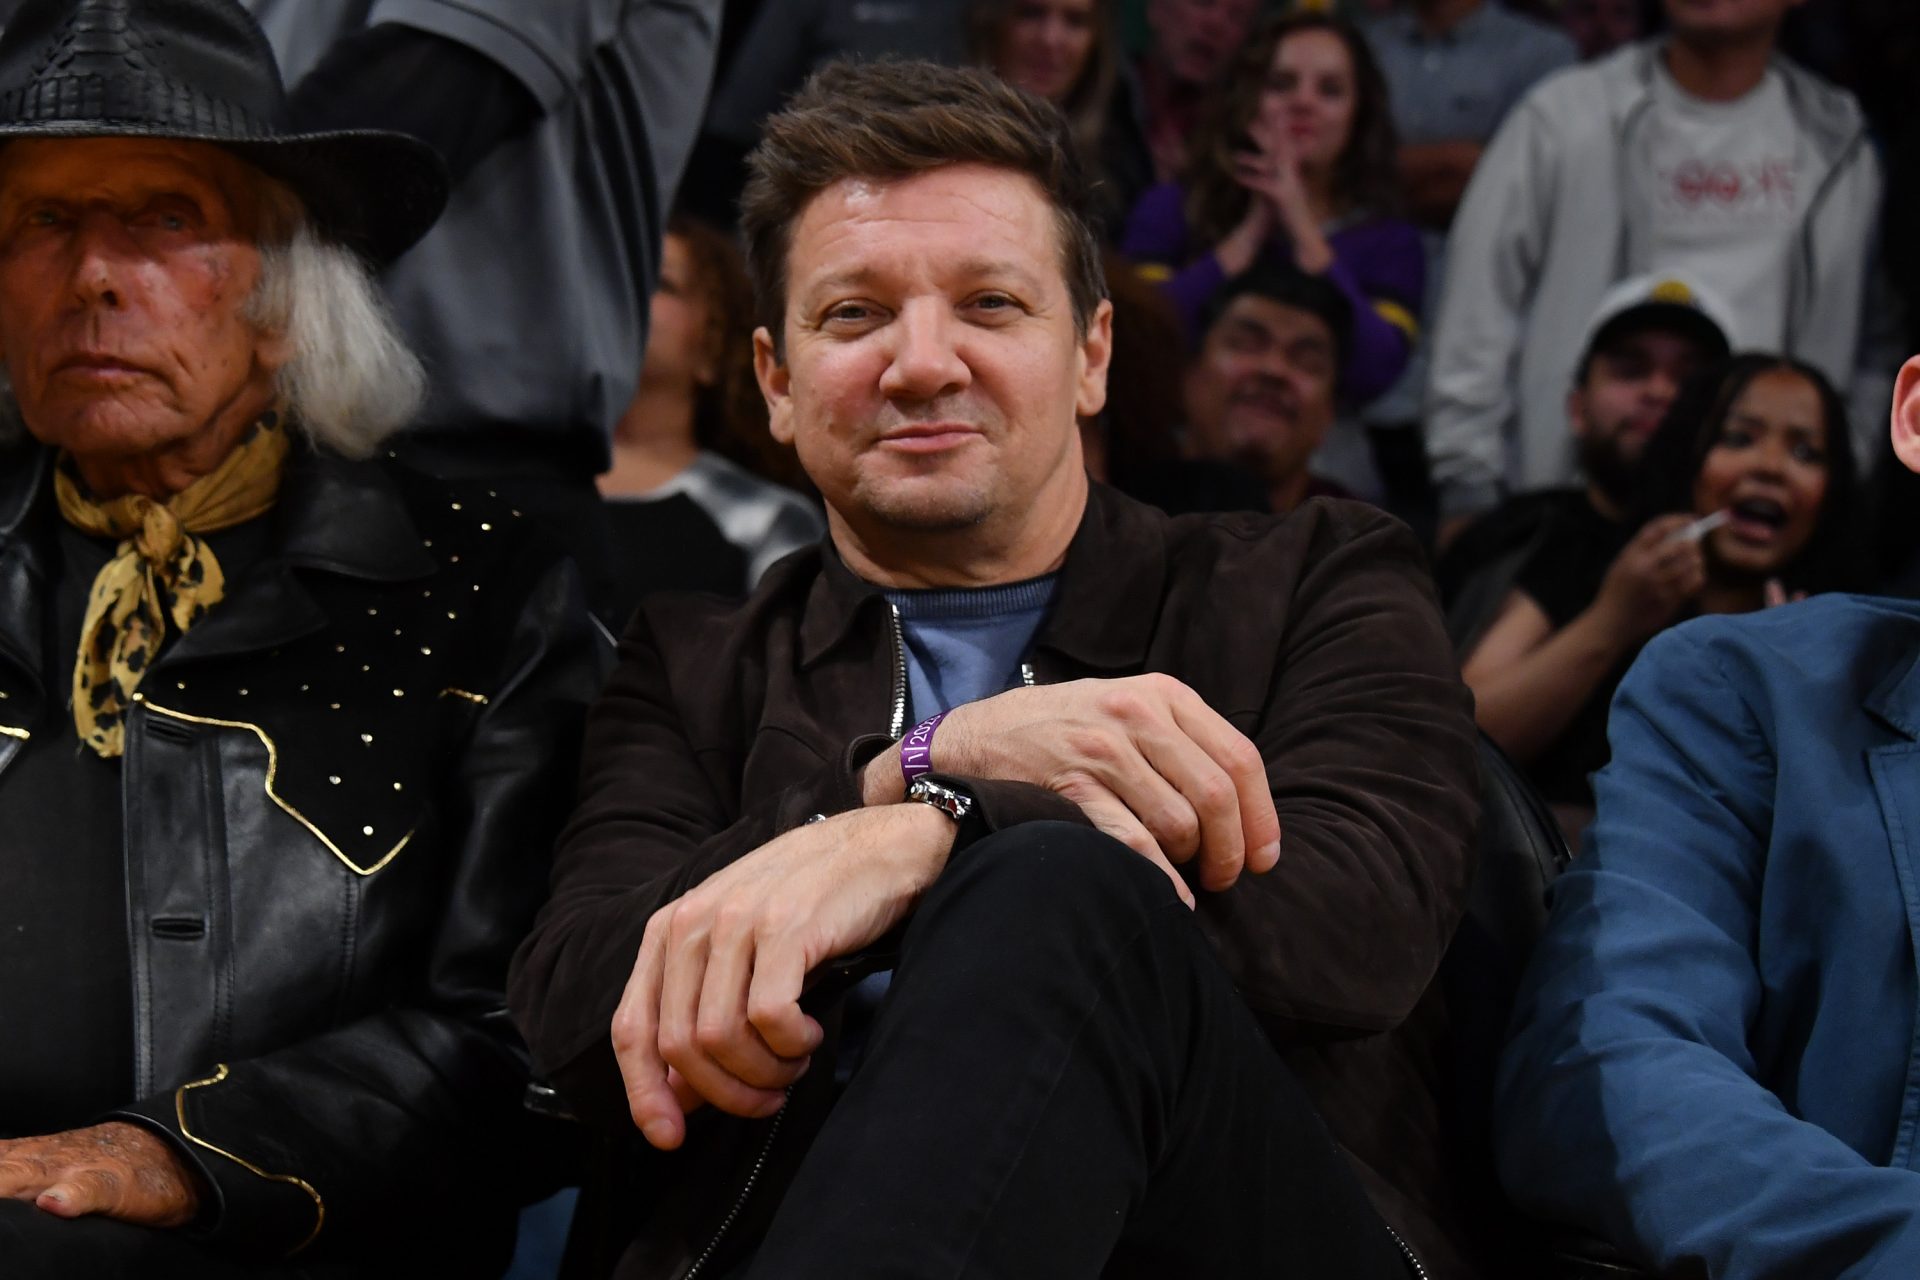 Jeremy Renner admits to struggle after accident: 